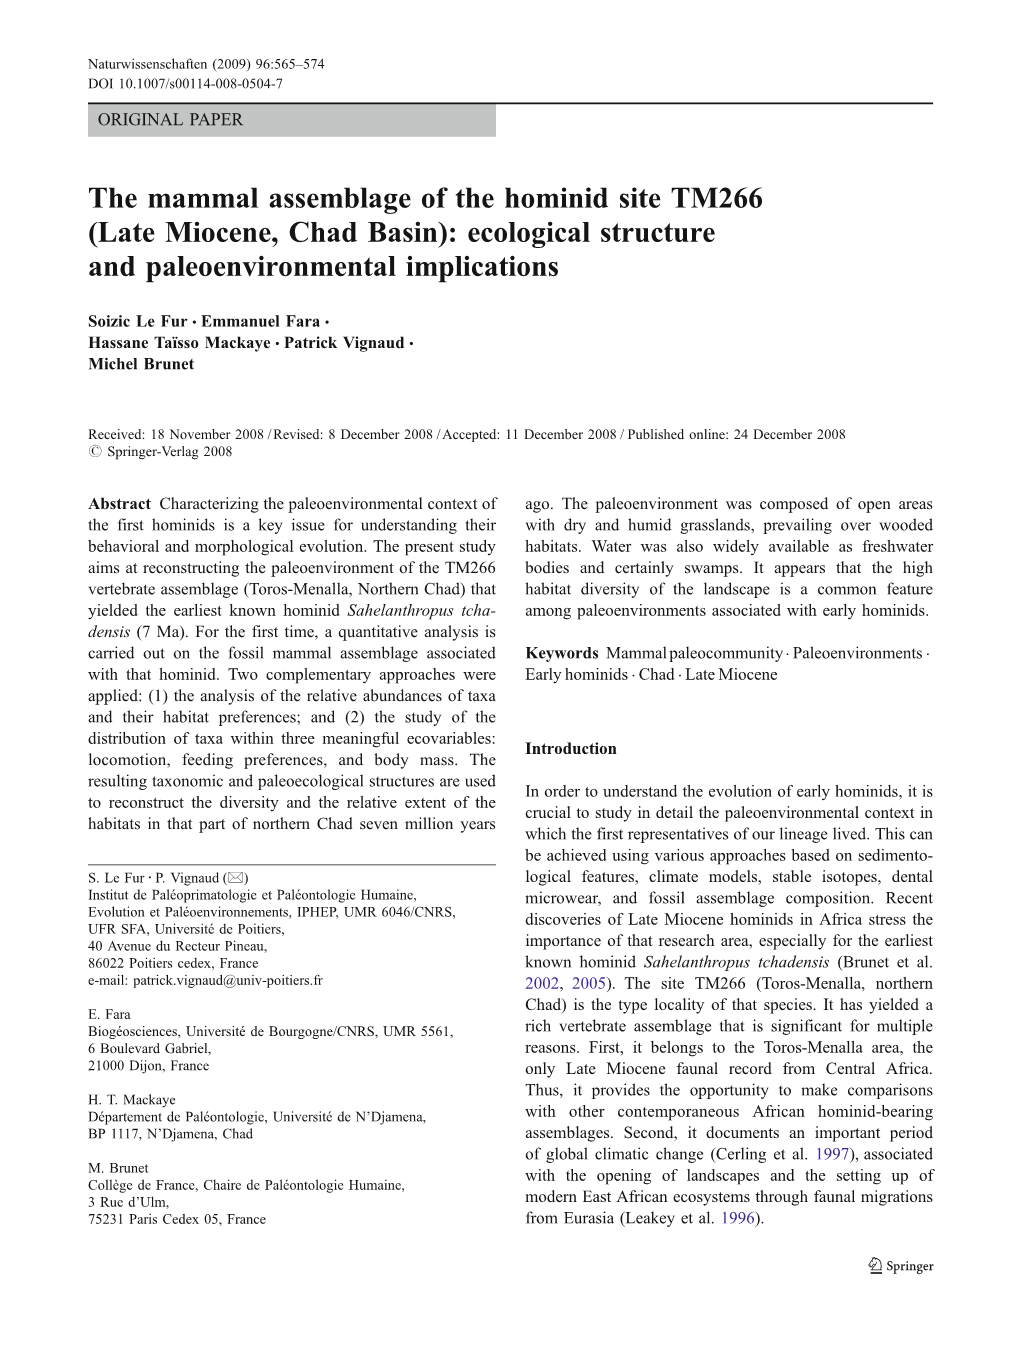 The Mammal Assemblage of the Hominid Site TM266 (Late Miocene, Chad Basin): Ecological Structure and Paleoenvironmental Implications